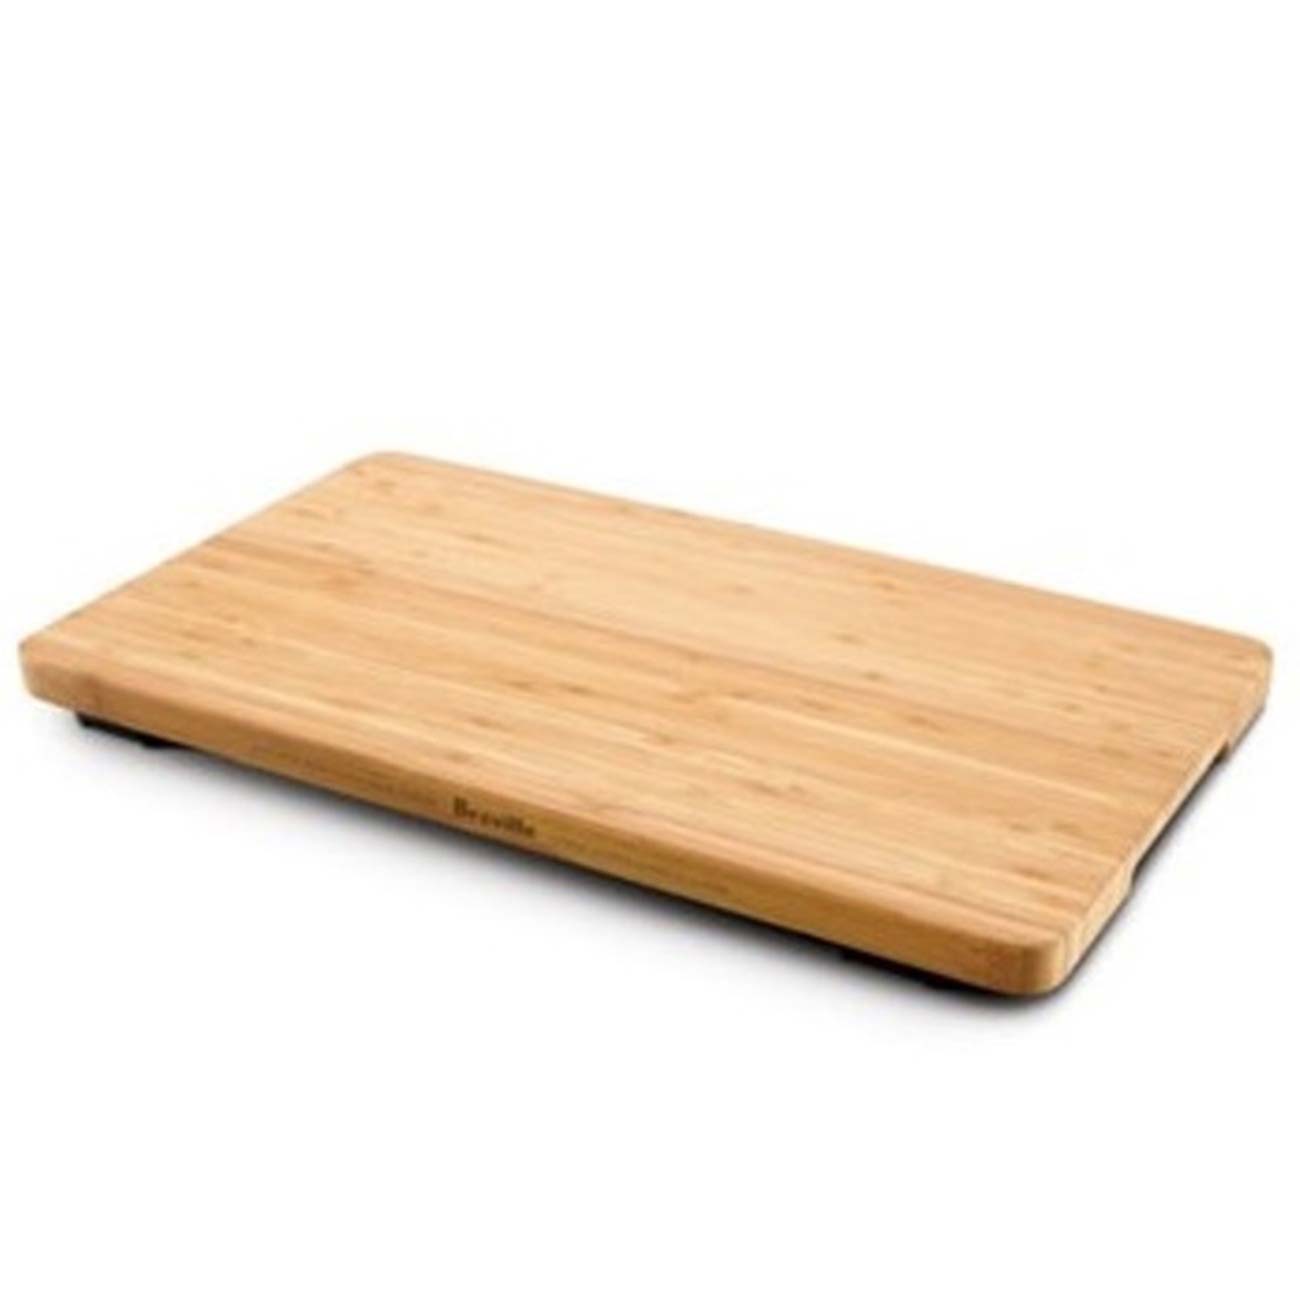 Bamboo Cutting Board for Compact Smart Oven